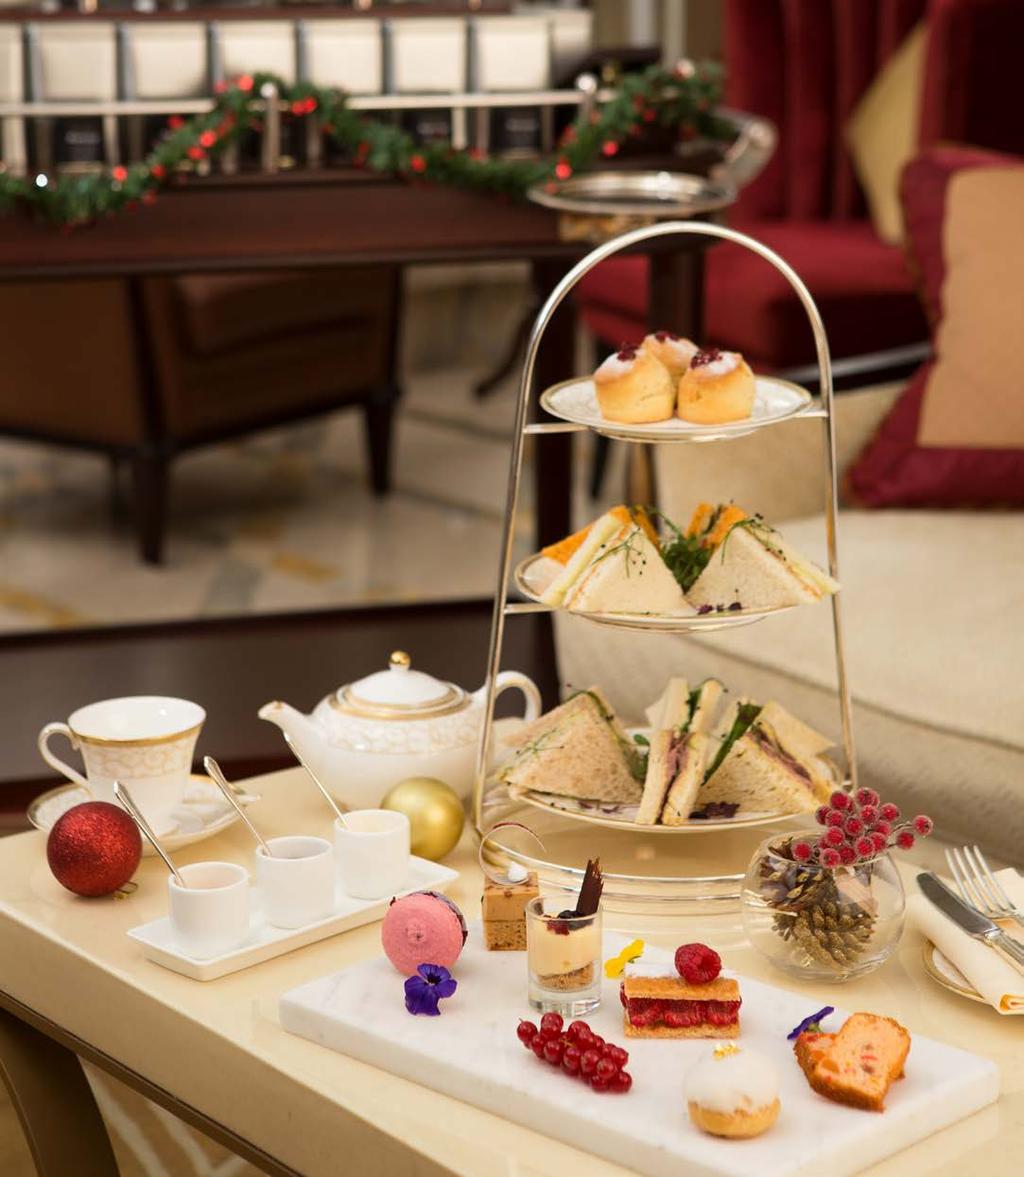 Festive Afternoon Tea 1st 30th December 2:00 pm 6:00 pm Crystal Lounge Celebrate the festive season with the time-honored tradition of afternoon tea at the Crystal Lounge.